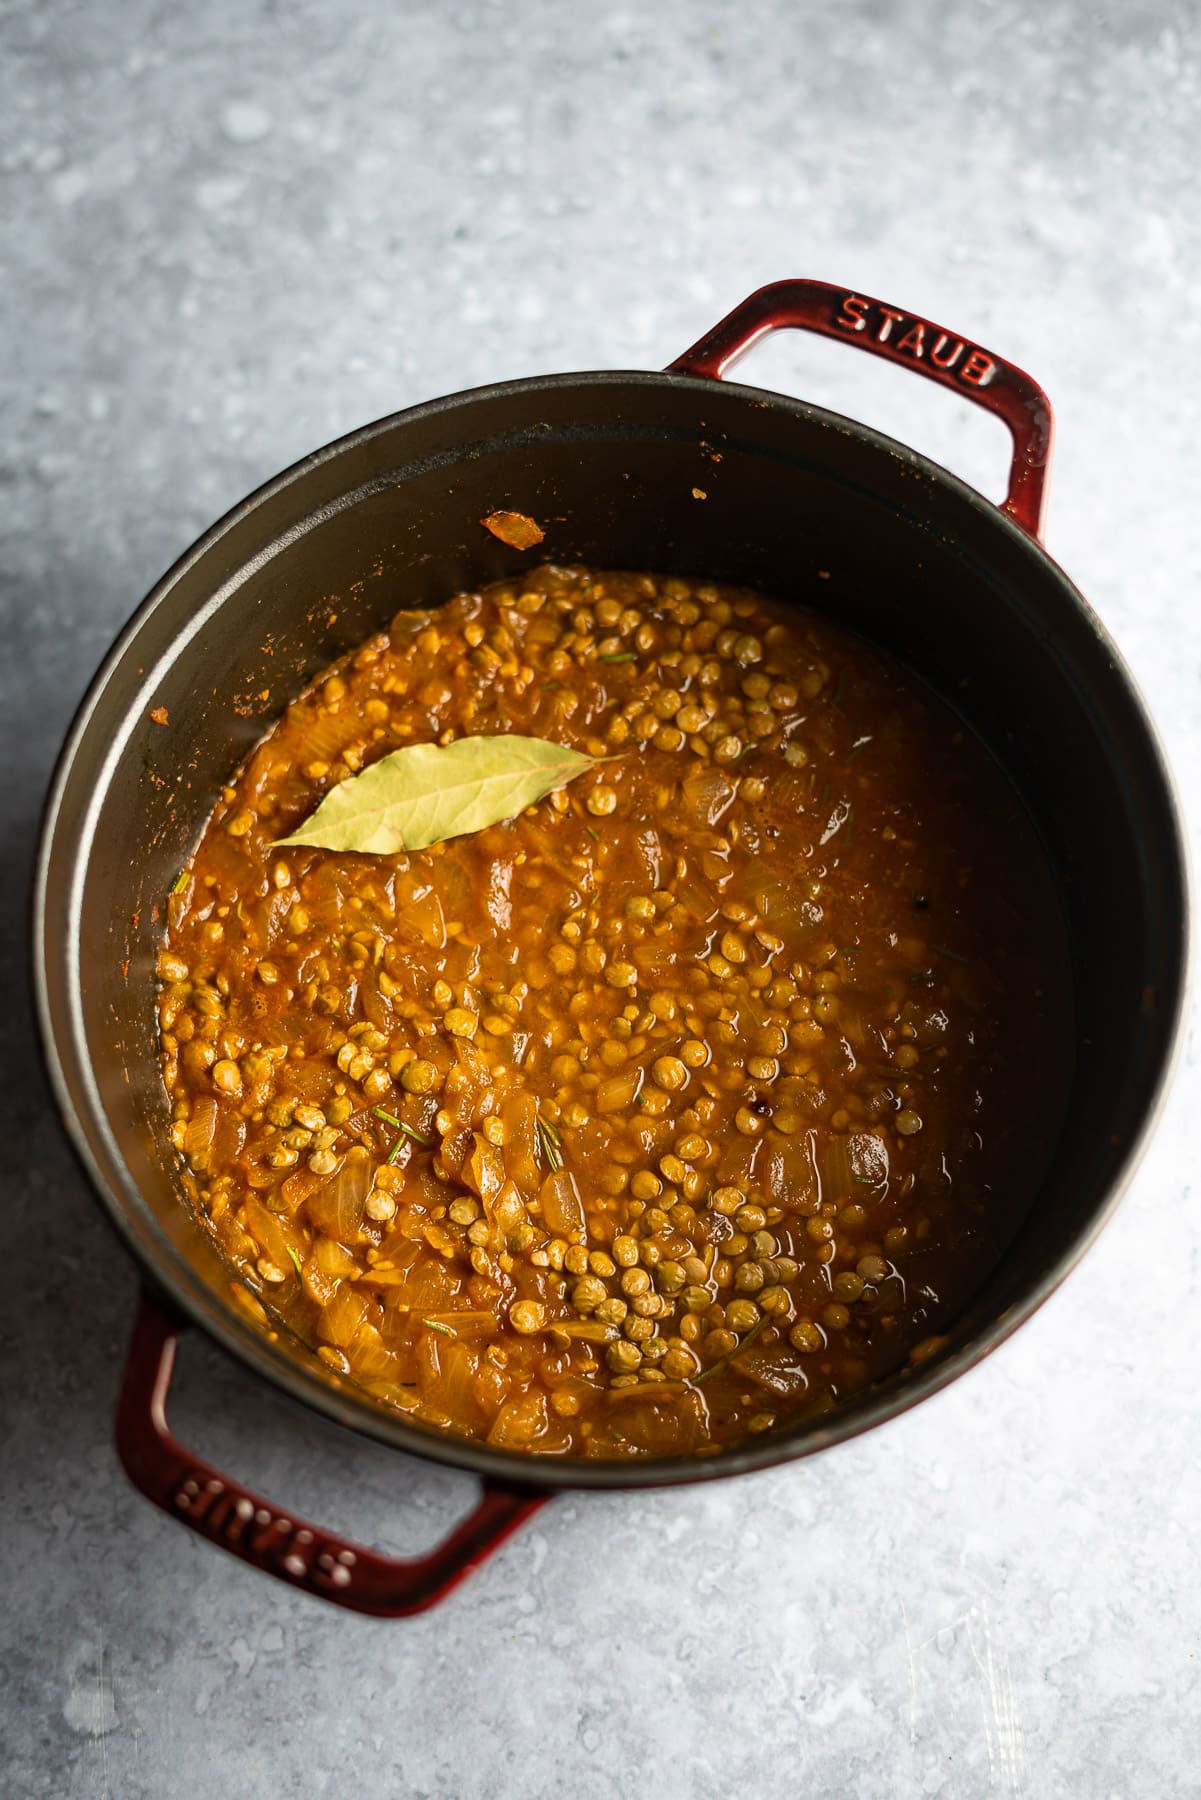 lentils in a staub cocotte ready to be cooked